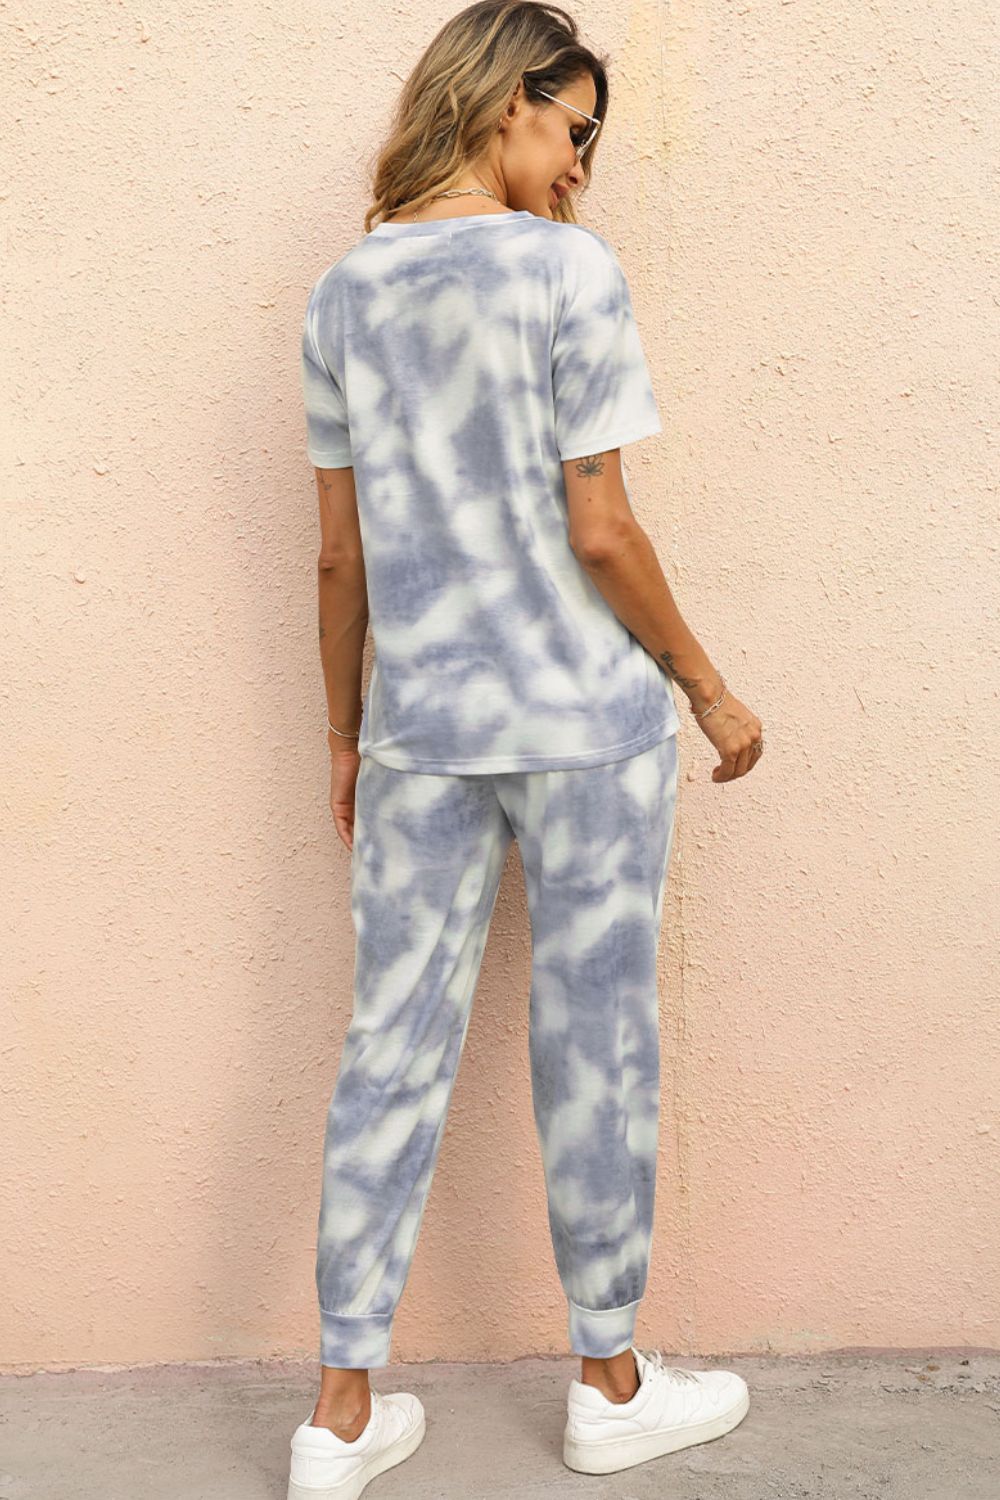 Tie-Dye Round Neck Short Sleeve Top and Pants Set Print on any thing USA/STOD clothes